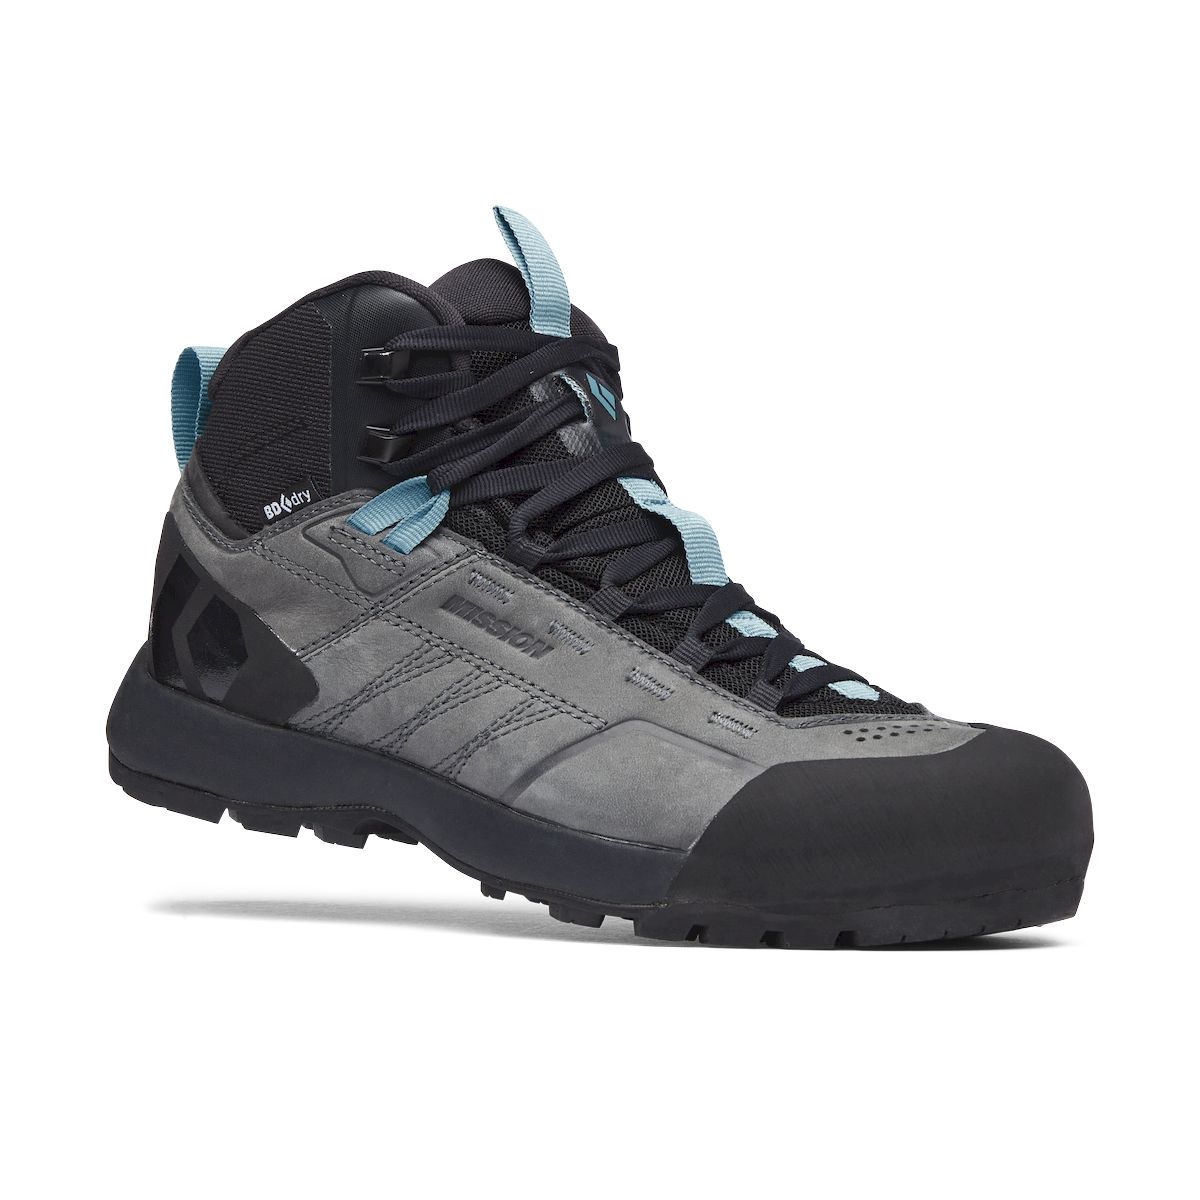 Black Diamond Mission Leather Mid Wp - Chaussures approche femme | Hardloop